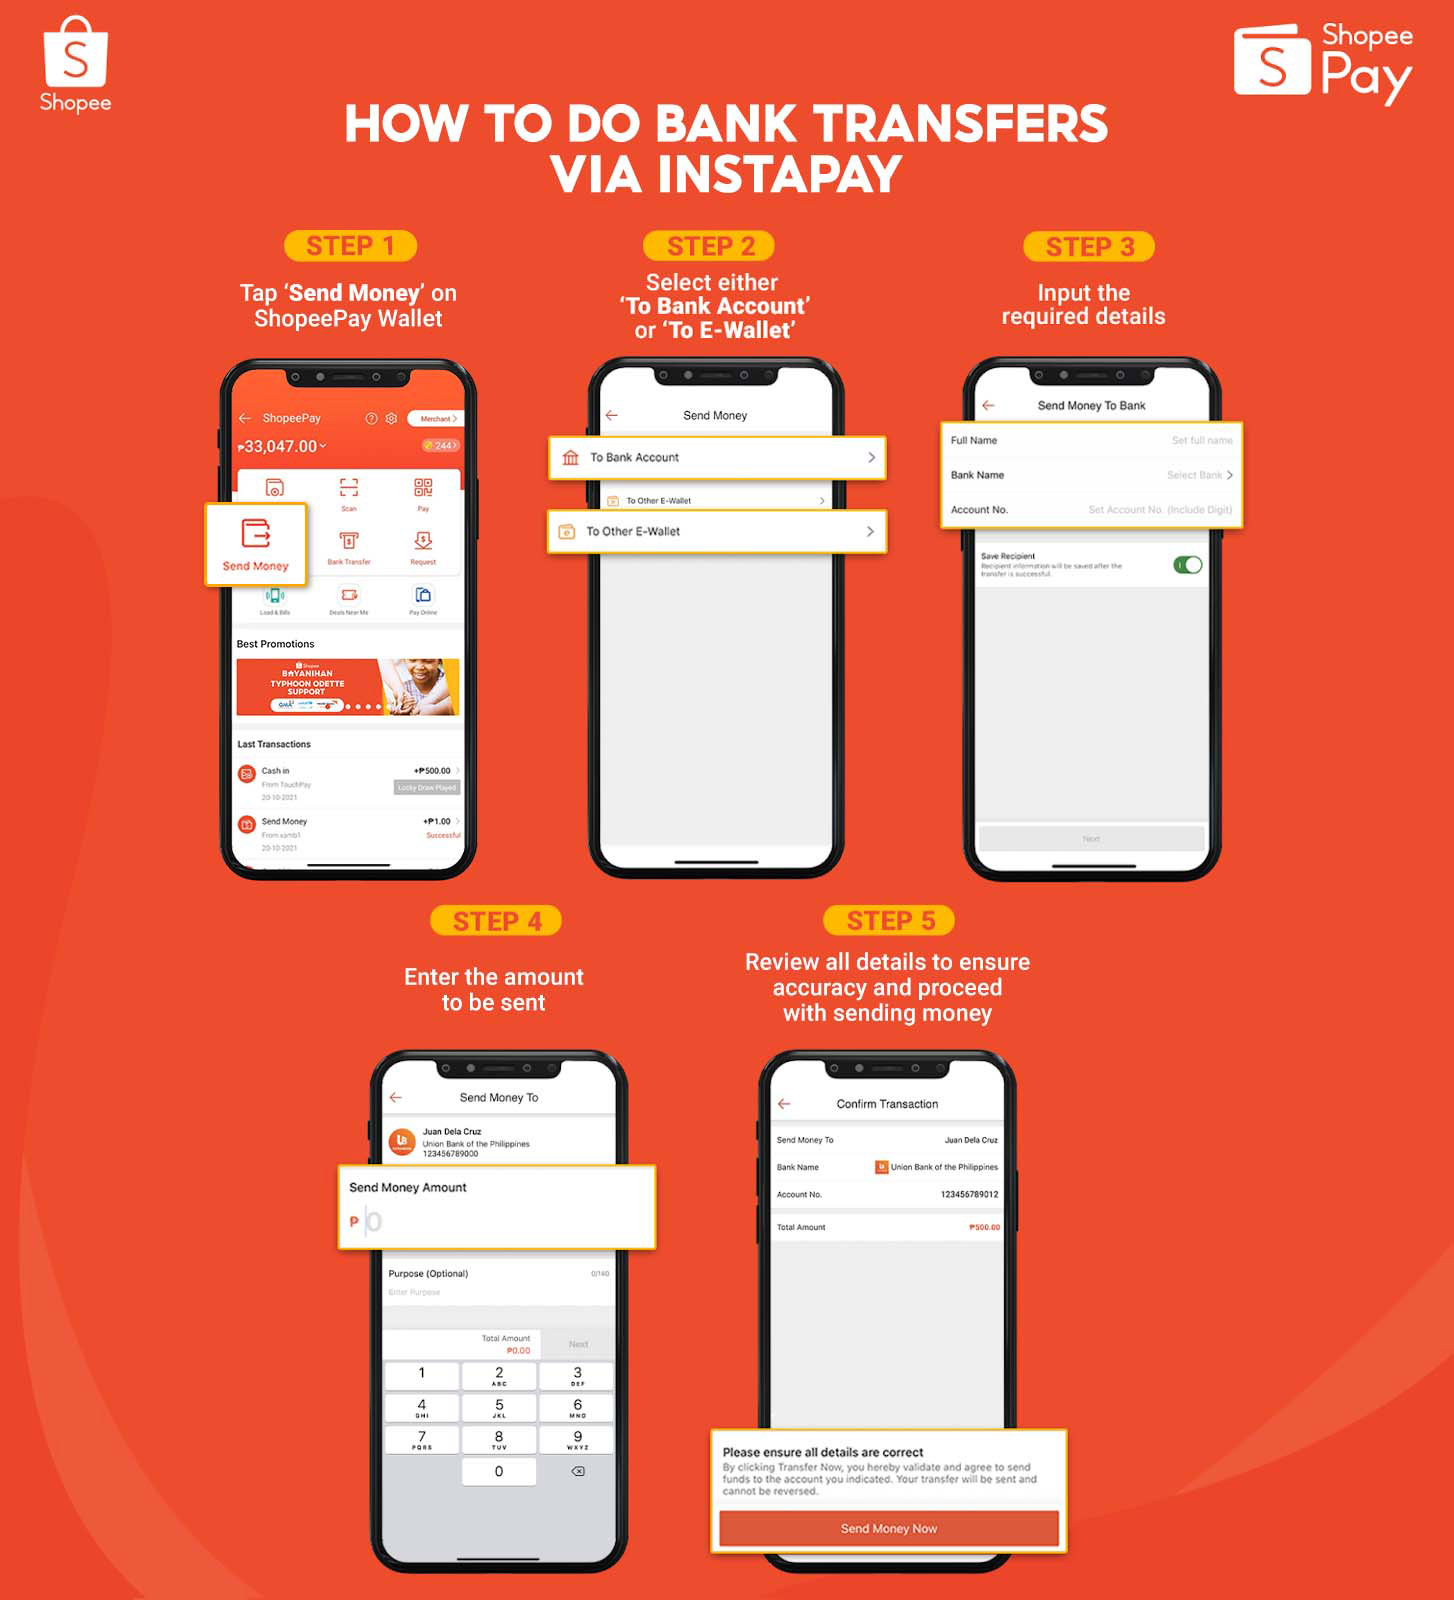 How to transfer money from ShopeePay to other banks or e-wallets via instaPay 